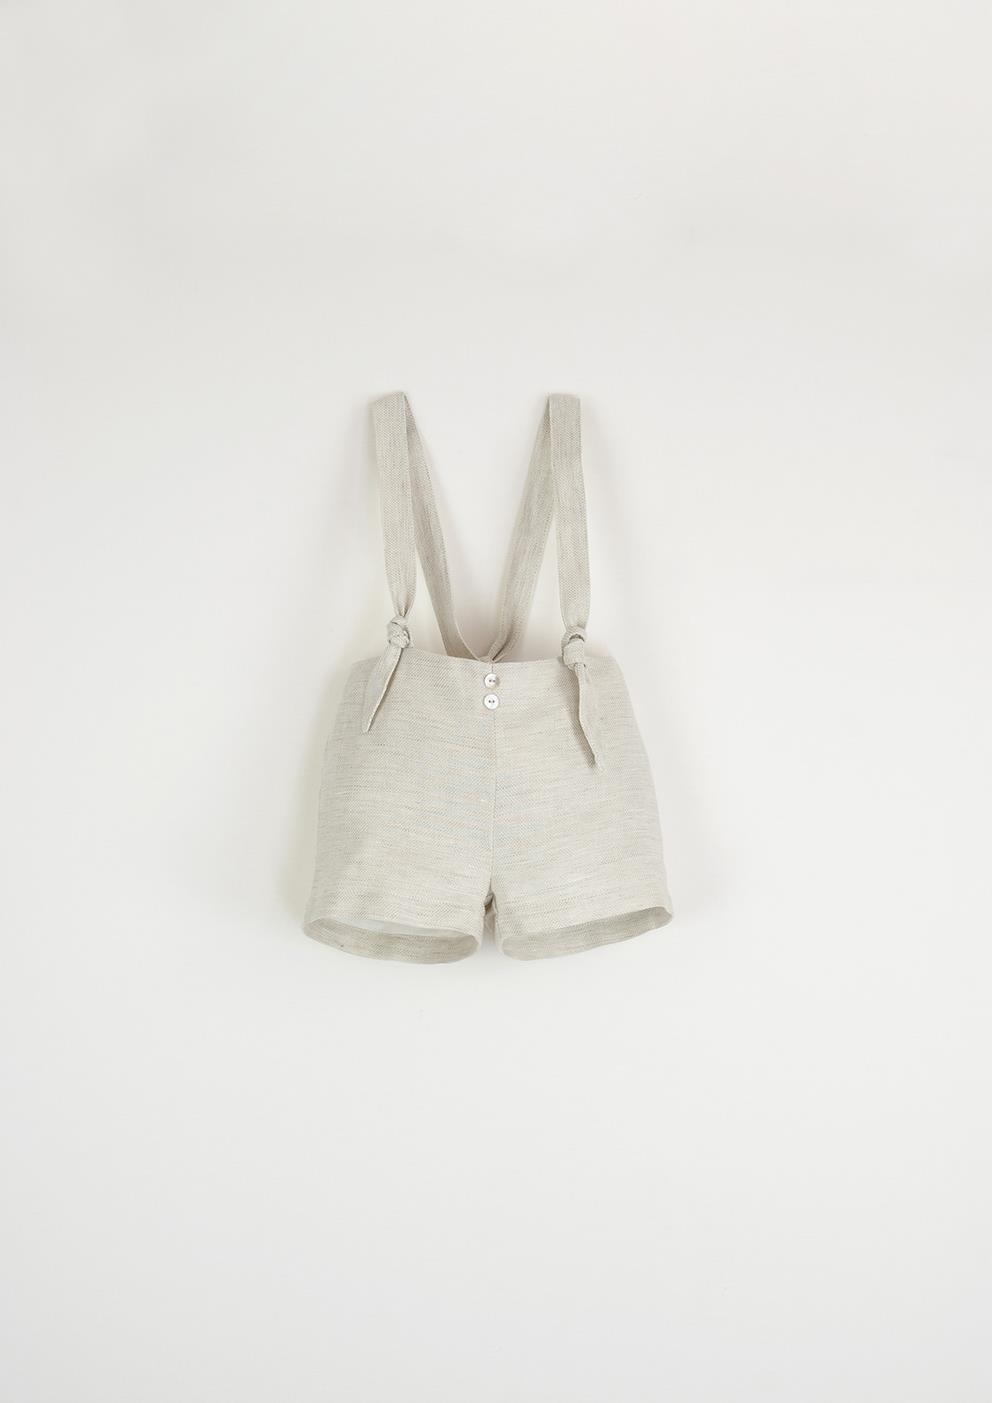 Mod.15.6 Neutral colour dungarees with remova- ble straps | SS23 Mod.15.6 Neutral colour dungarees with remova- ble straps